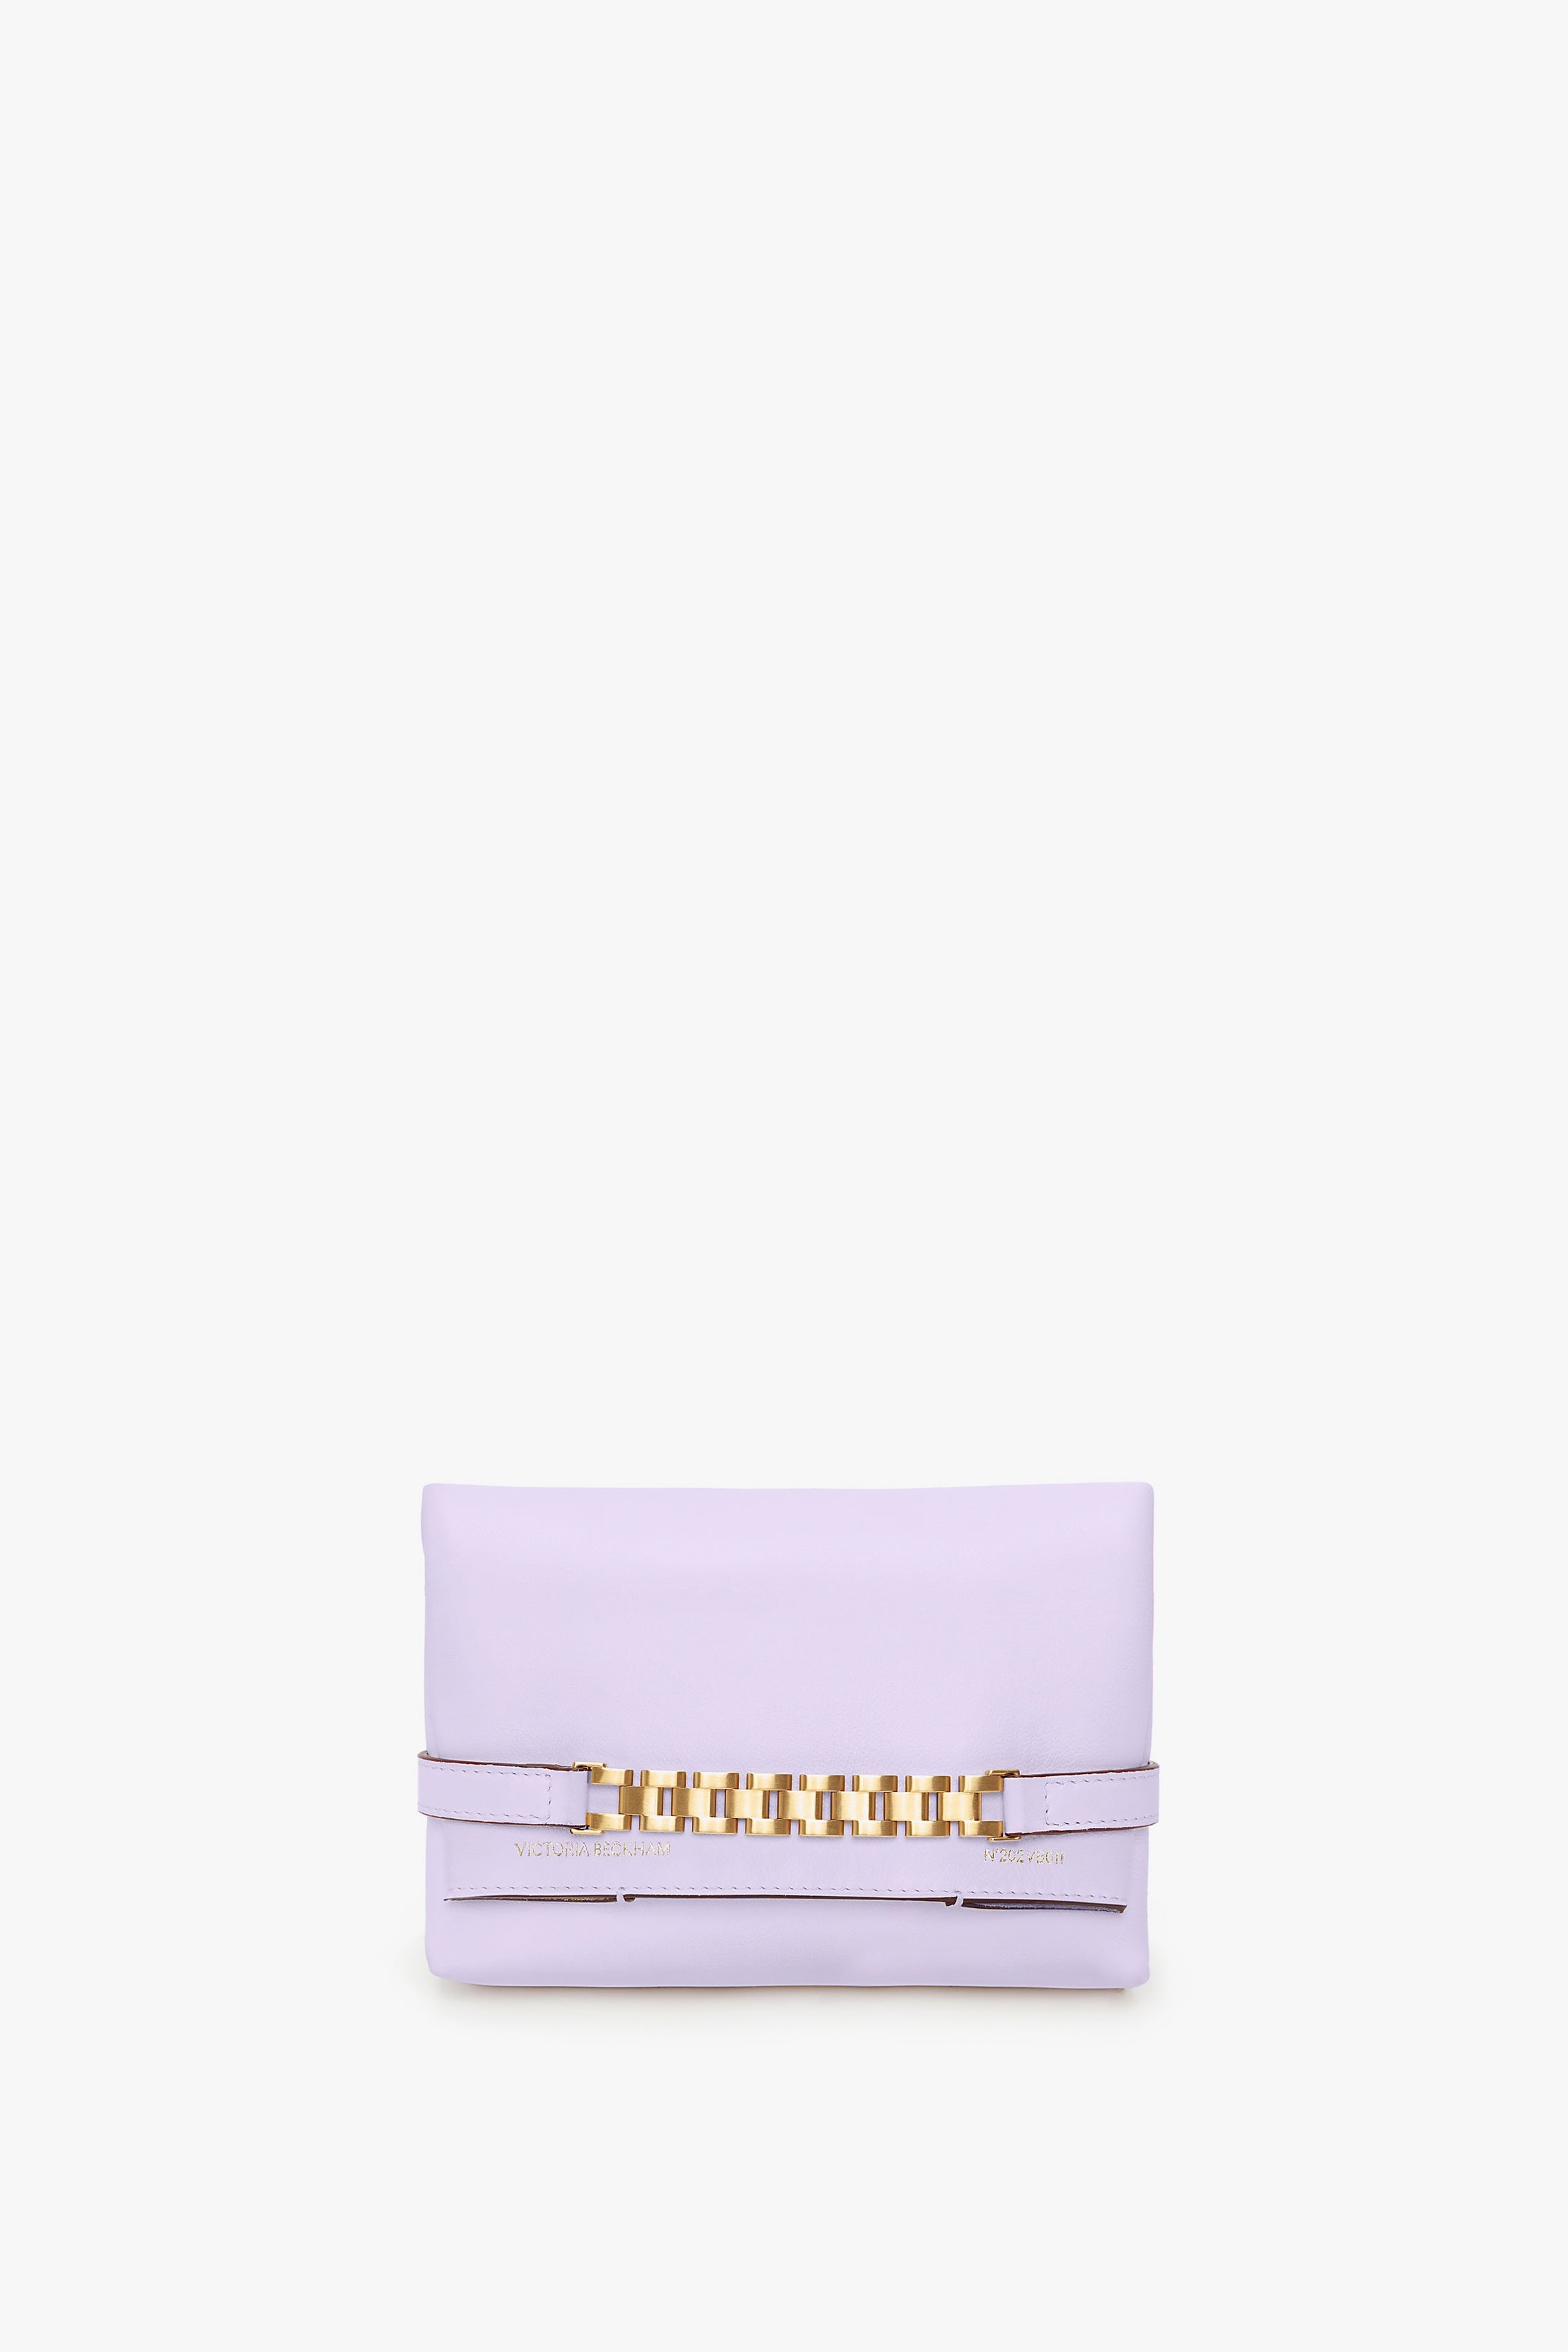 EXCLUSIVE Mini Chain Pouch With Long Strap In Lilac Leather - 3